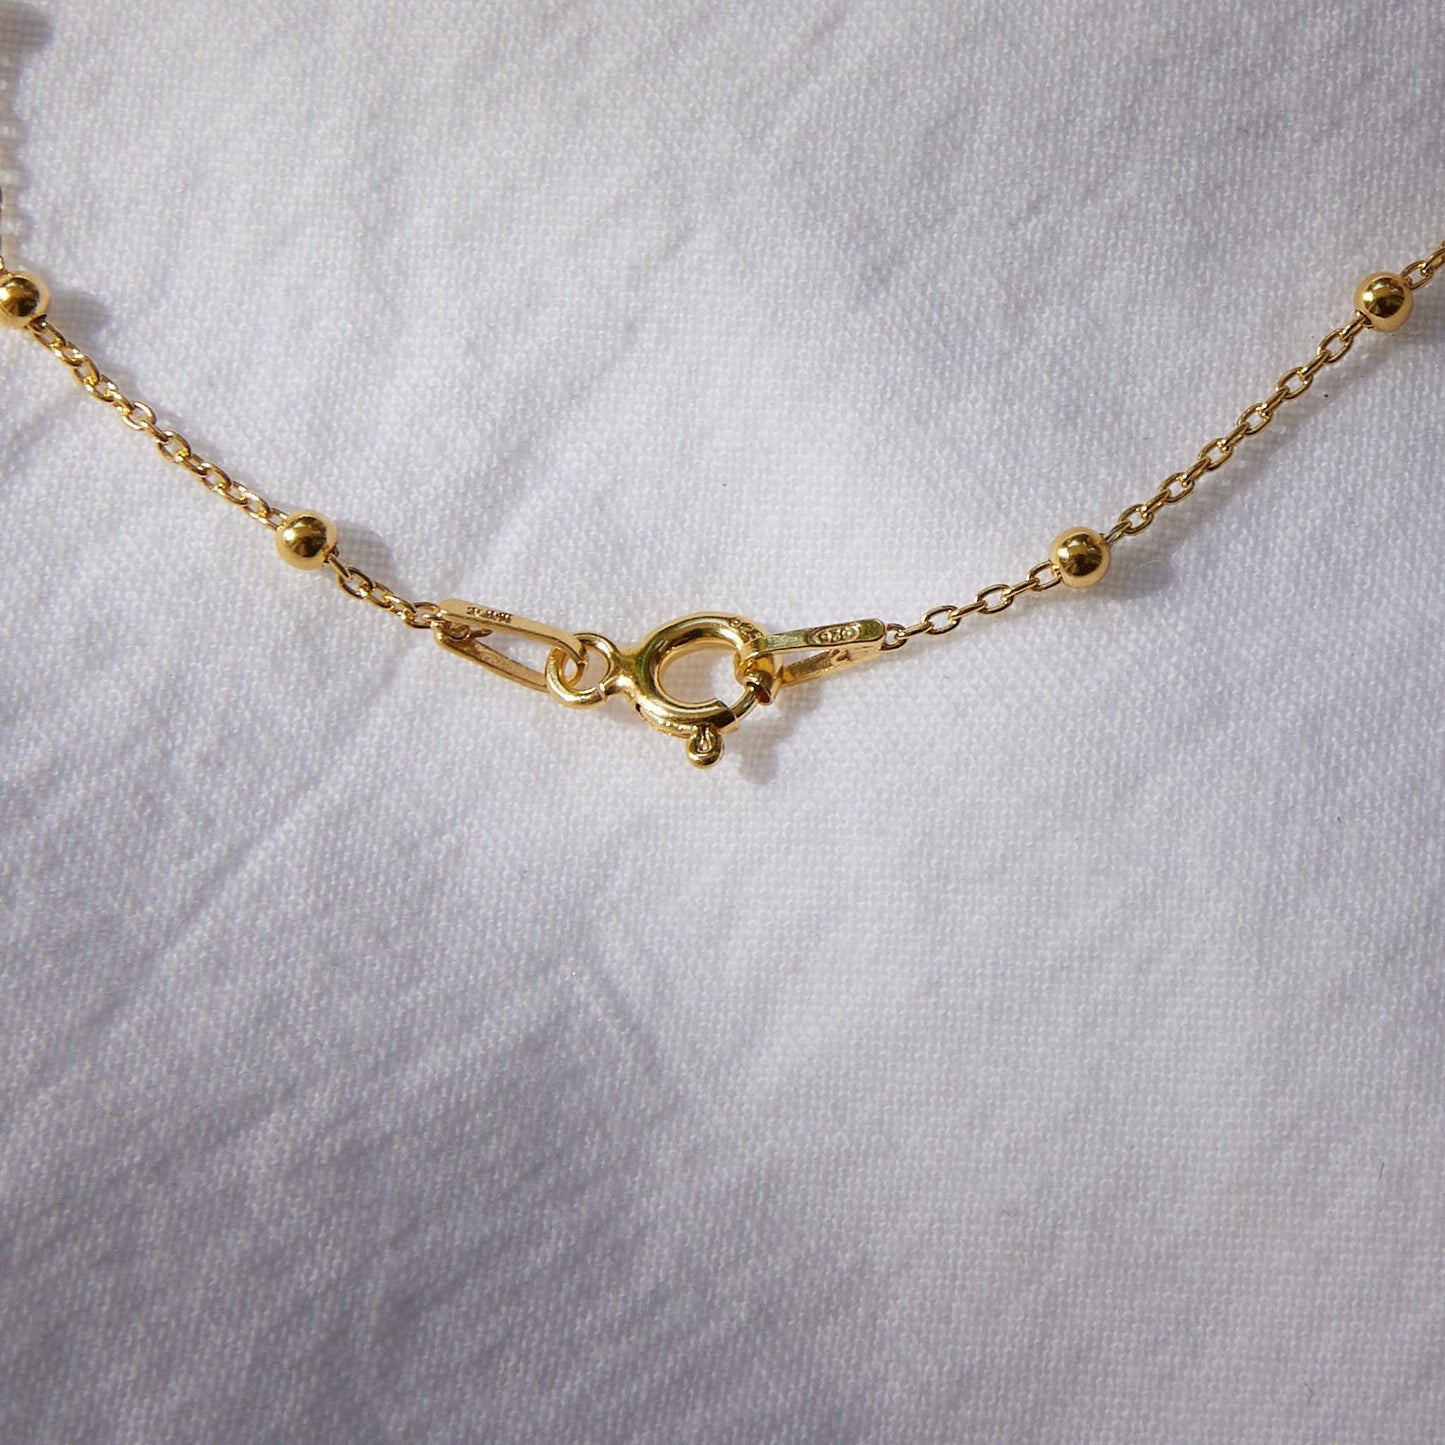 Pearl on 24k Gold plated ball chain